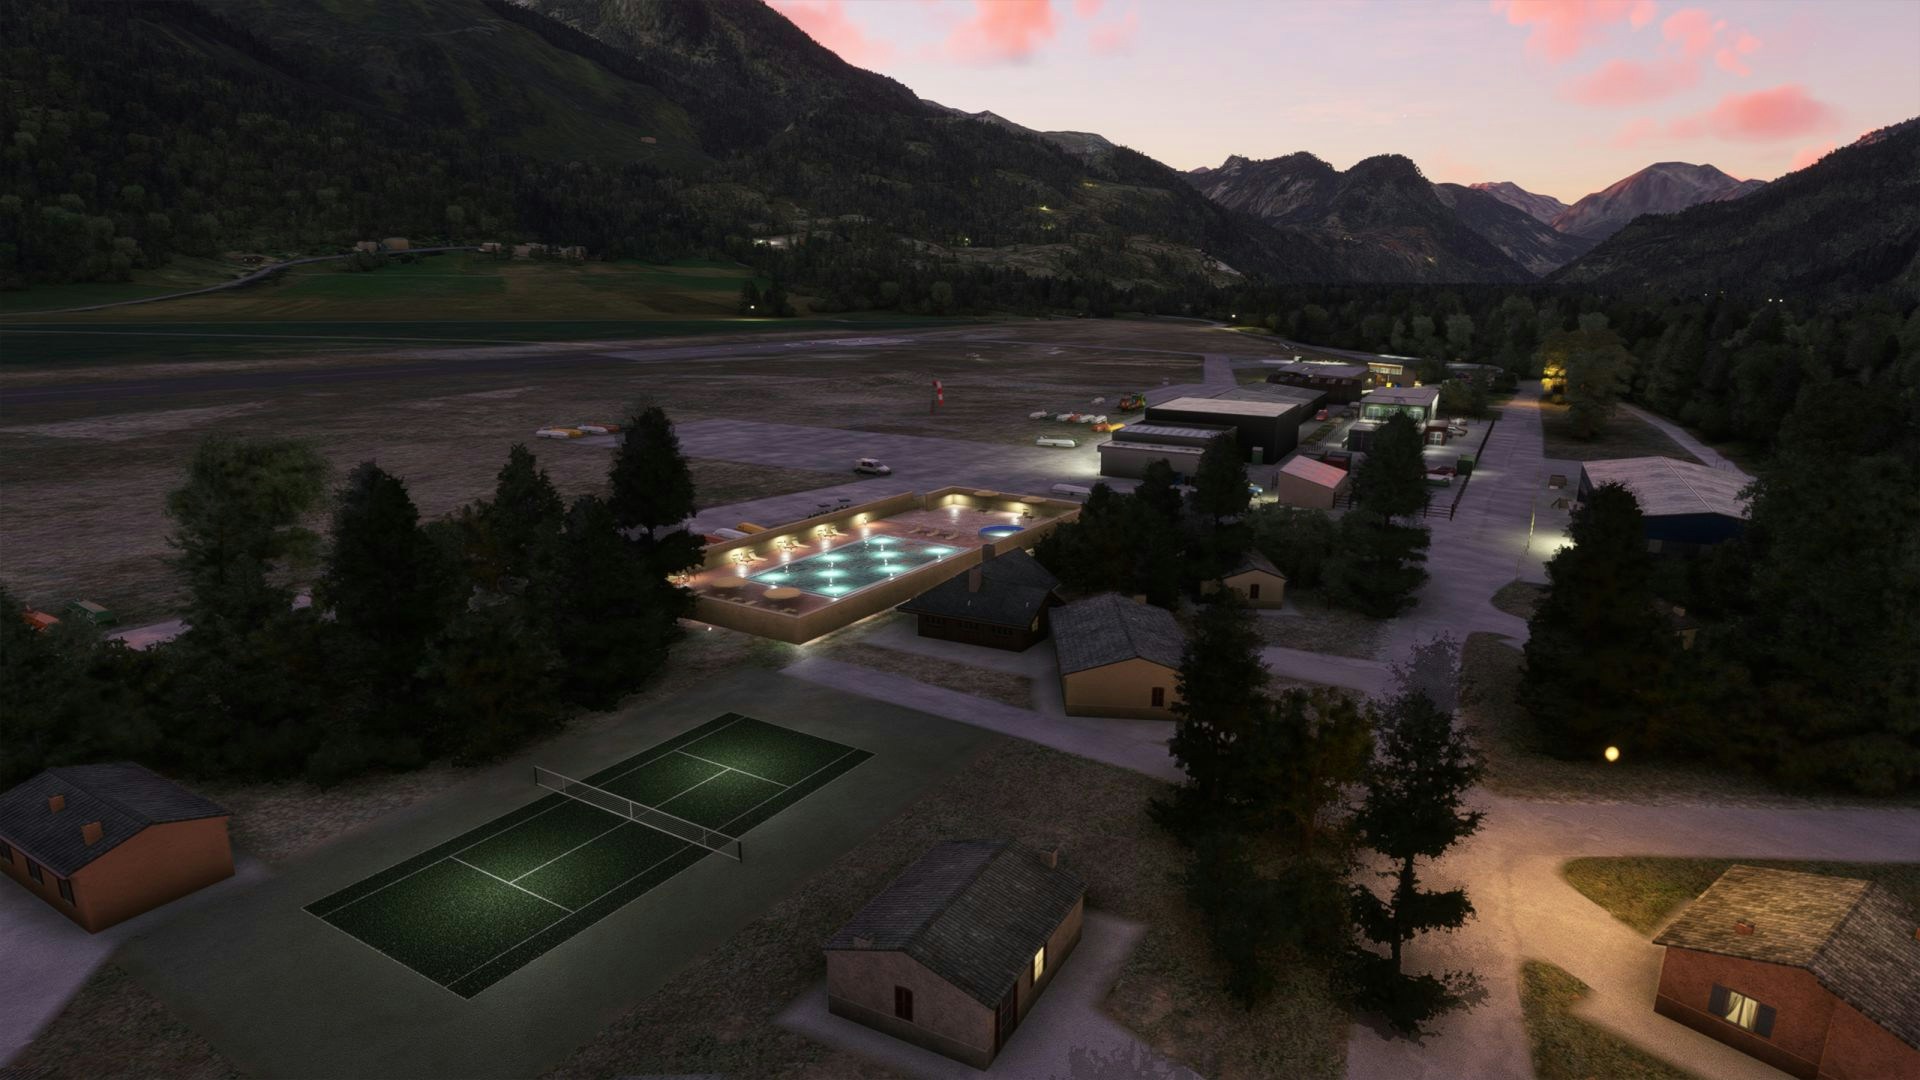 FSDreamTeam Releases Mount Dauphin - St. Crepin Airport for MSFS